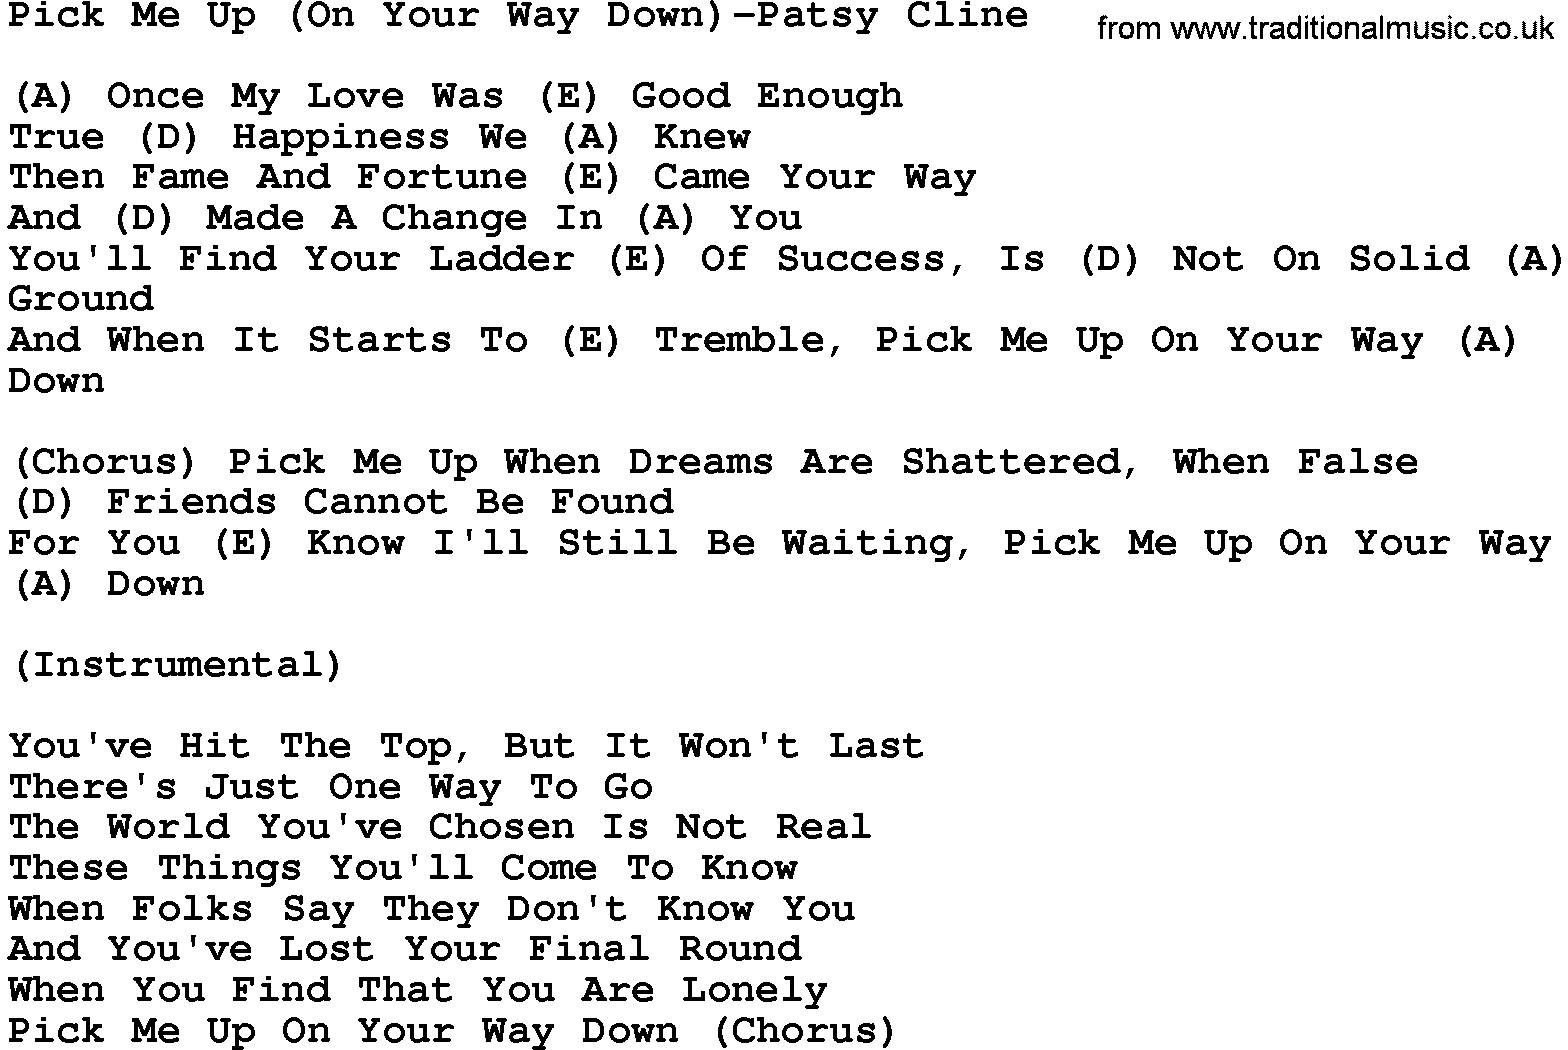 Country music song: Pick Me Up(On Your Way Down)-Patsy Cline lyrics and chords